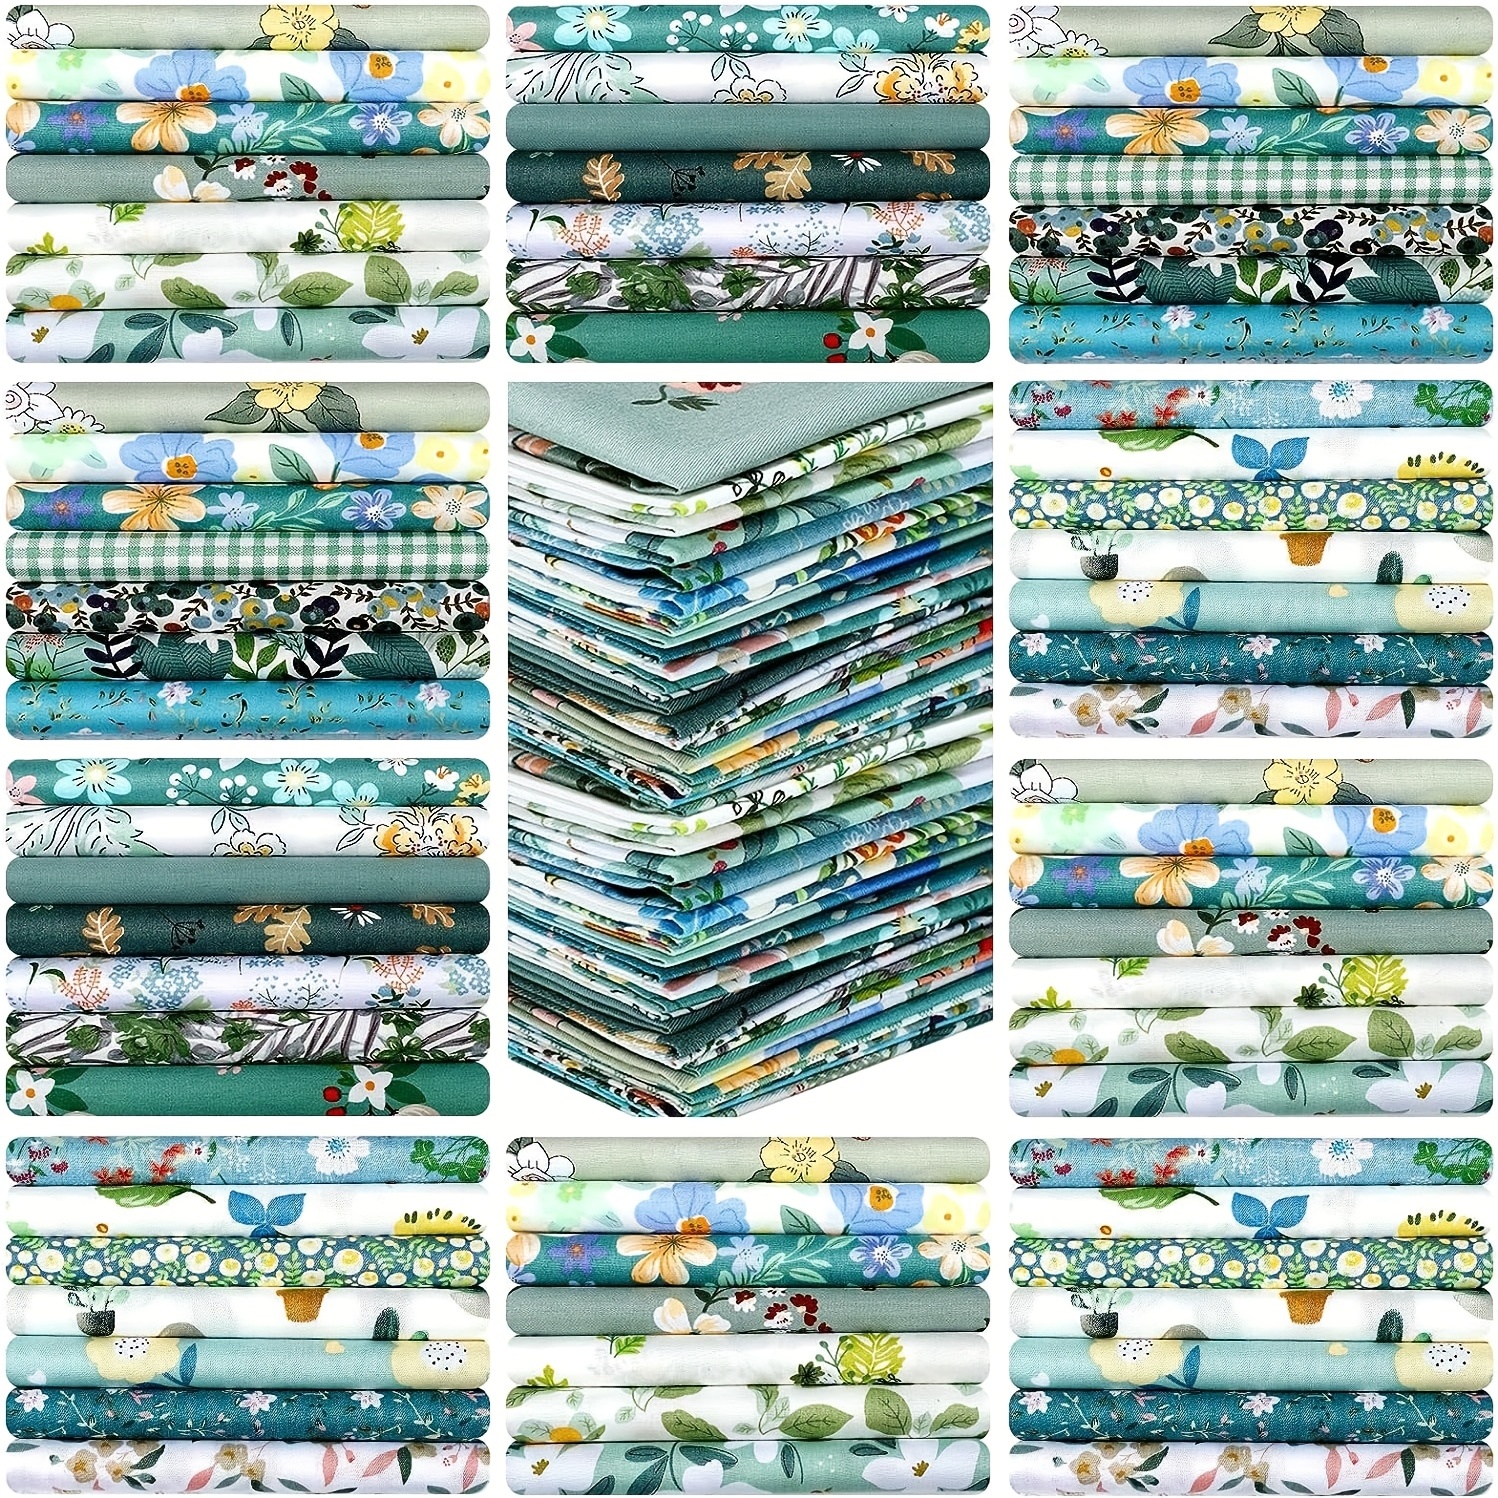 

20pcs 10 X 10 Inch Cotton Fabric Square No Repeat Fabrics Multi Color Printed Floral Square Fabric Quilting Fabric Bundles For Diy Crafts Cloths Handmade Accessory